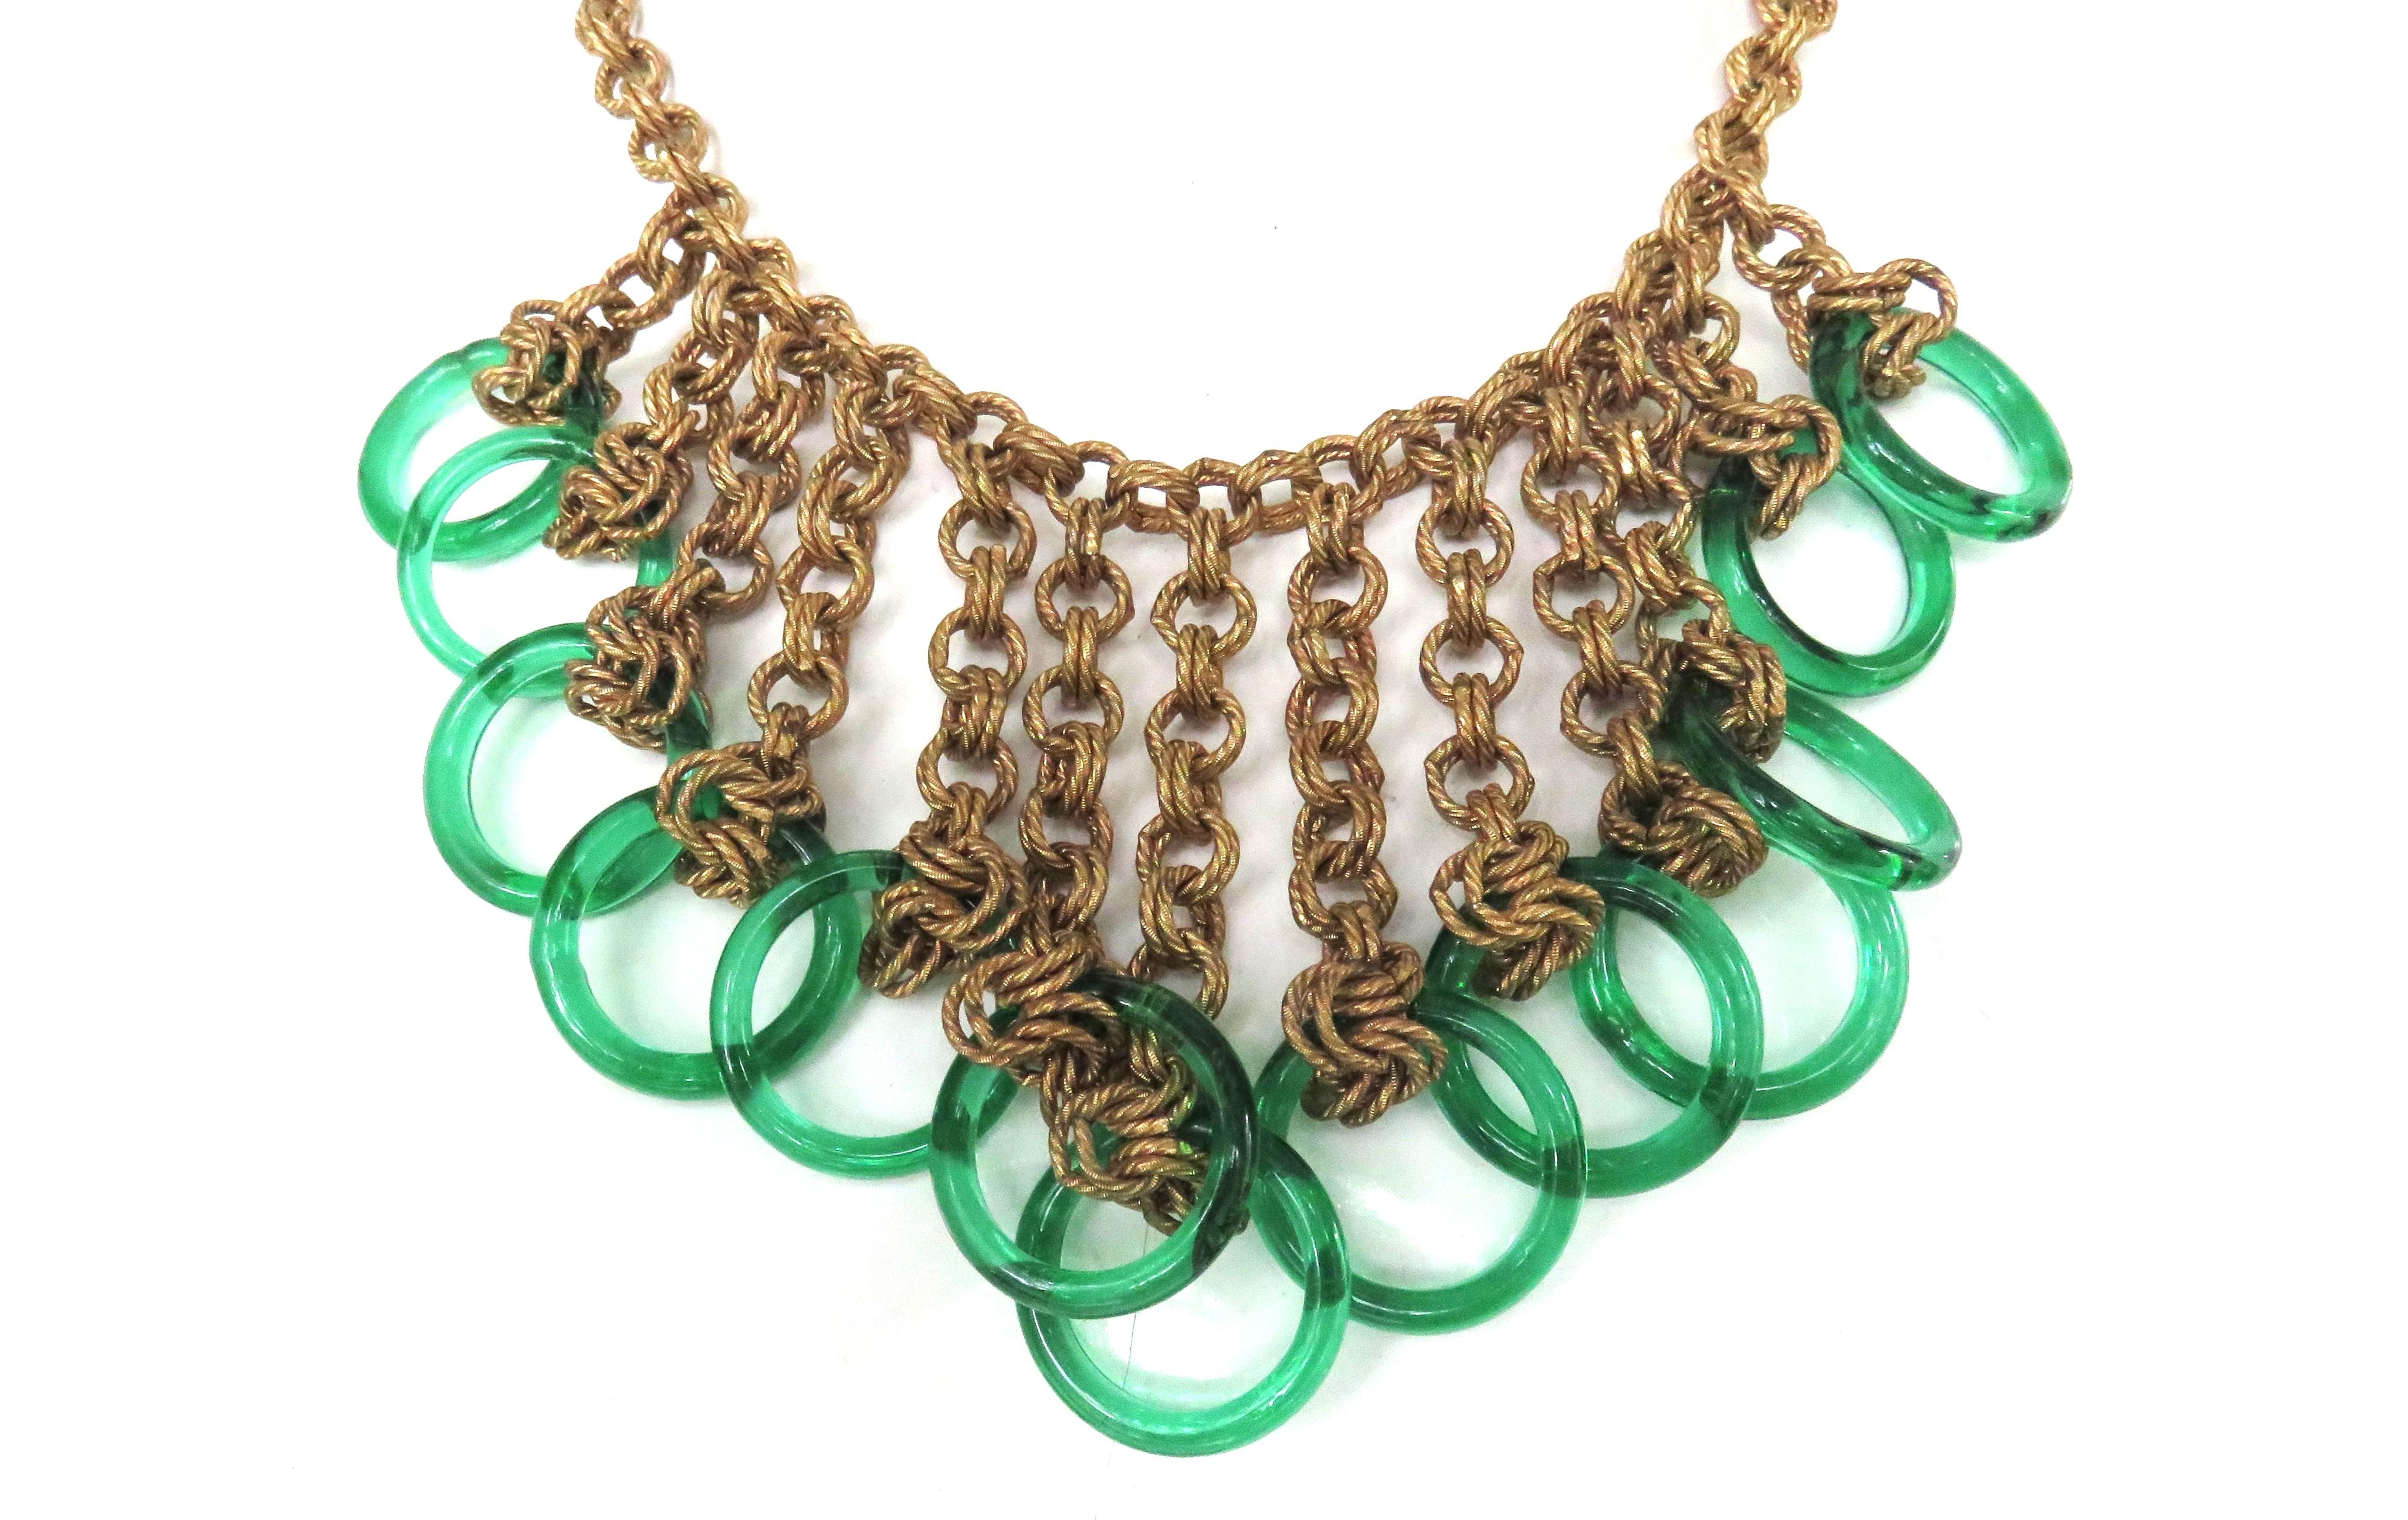 Women's Chain Bib 1940s Necklace with Green Glass Circles For Sale